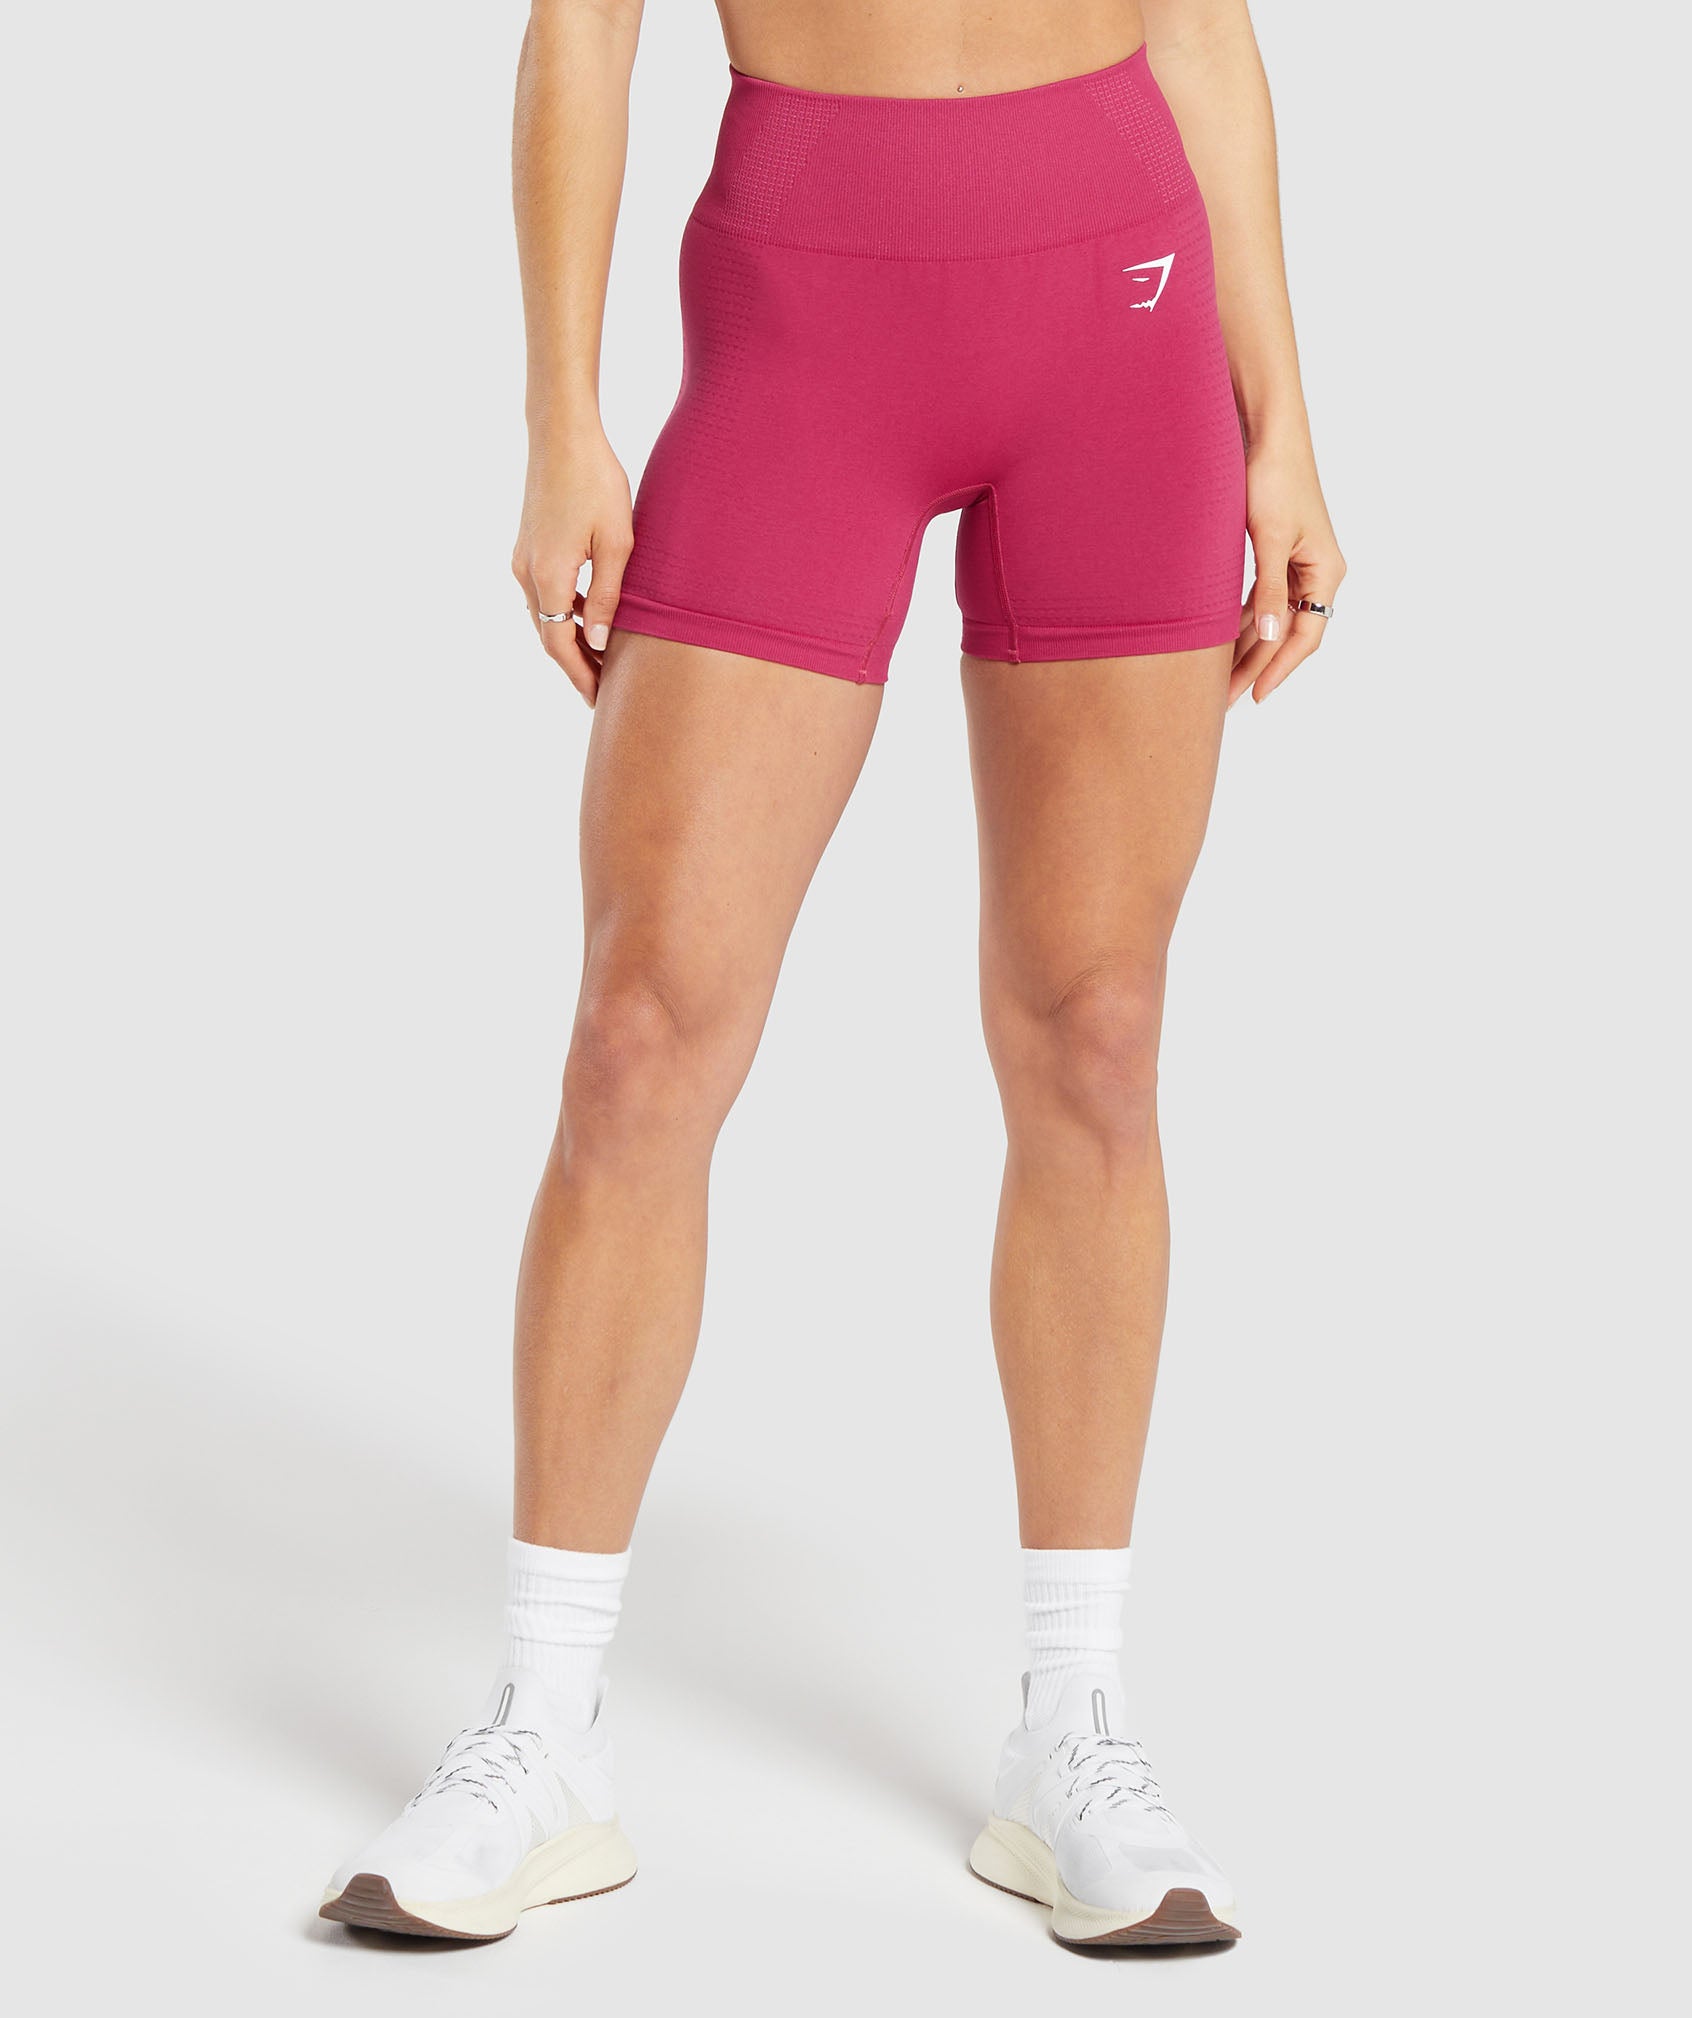 DNU Vital Seamless 2.0 Shorts in {{variantColor} is out of stock